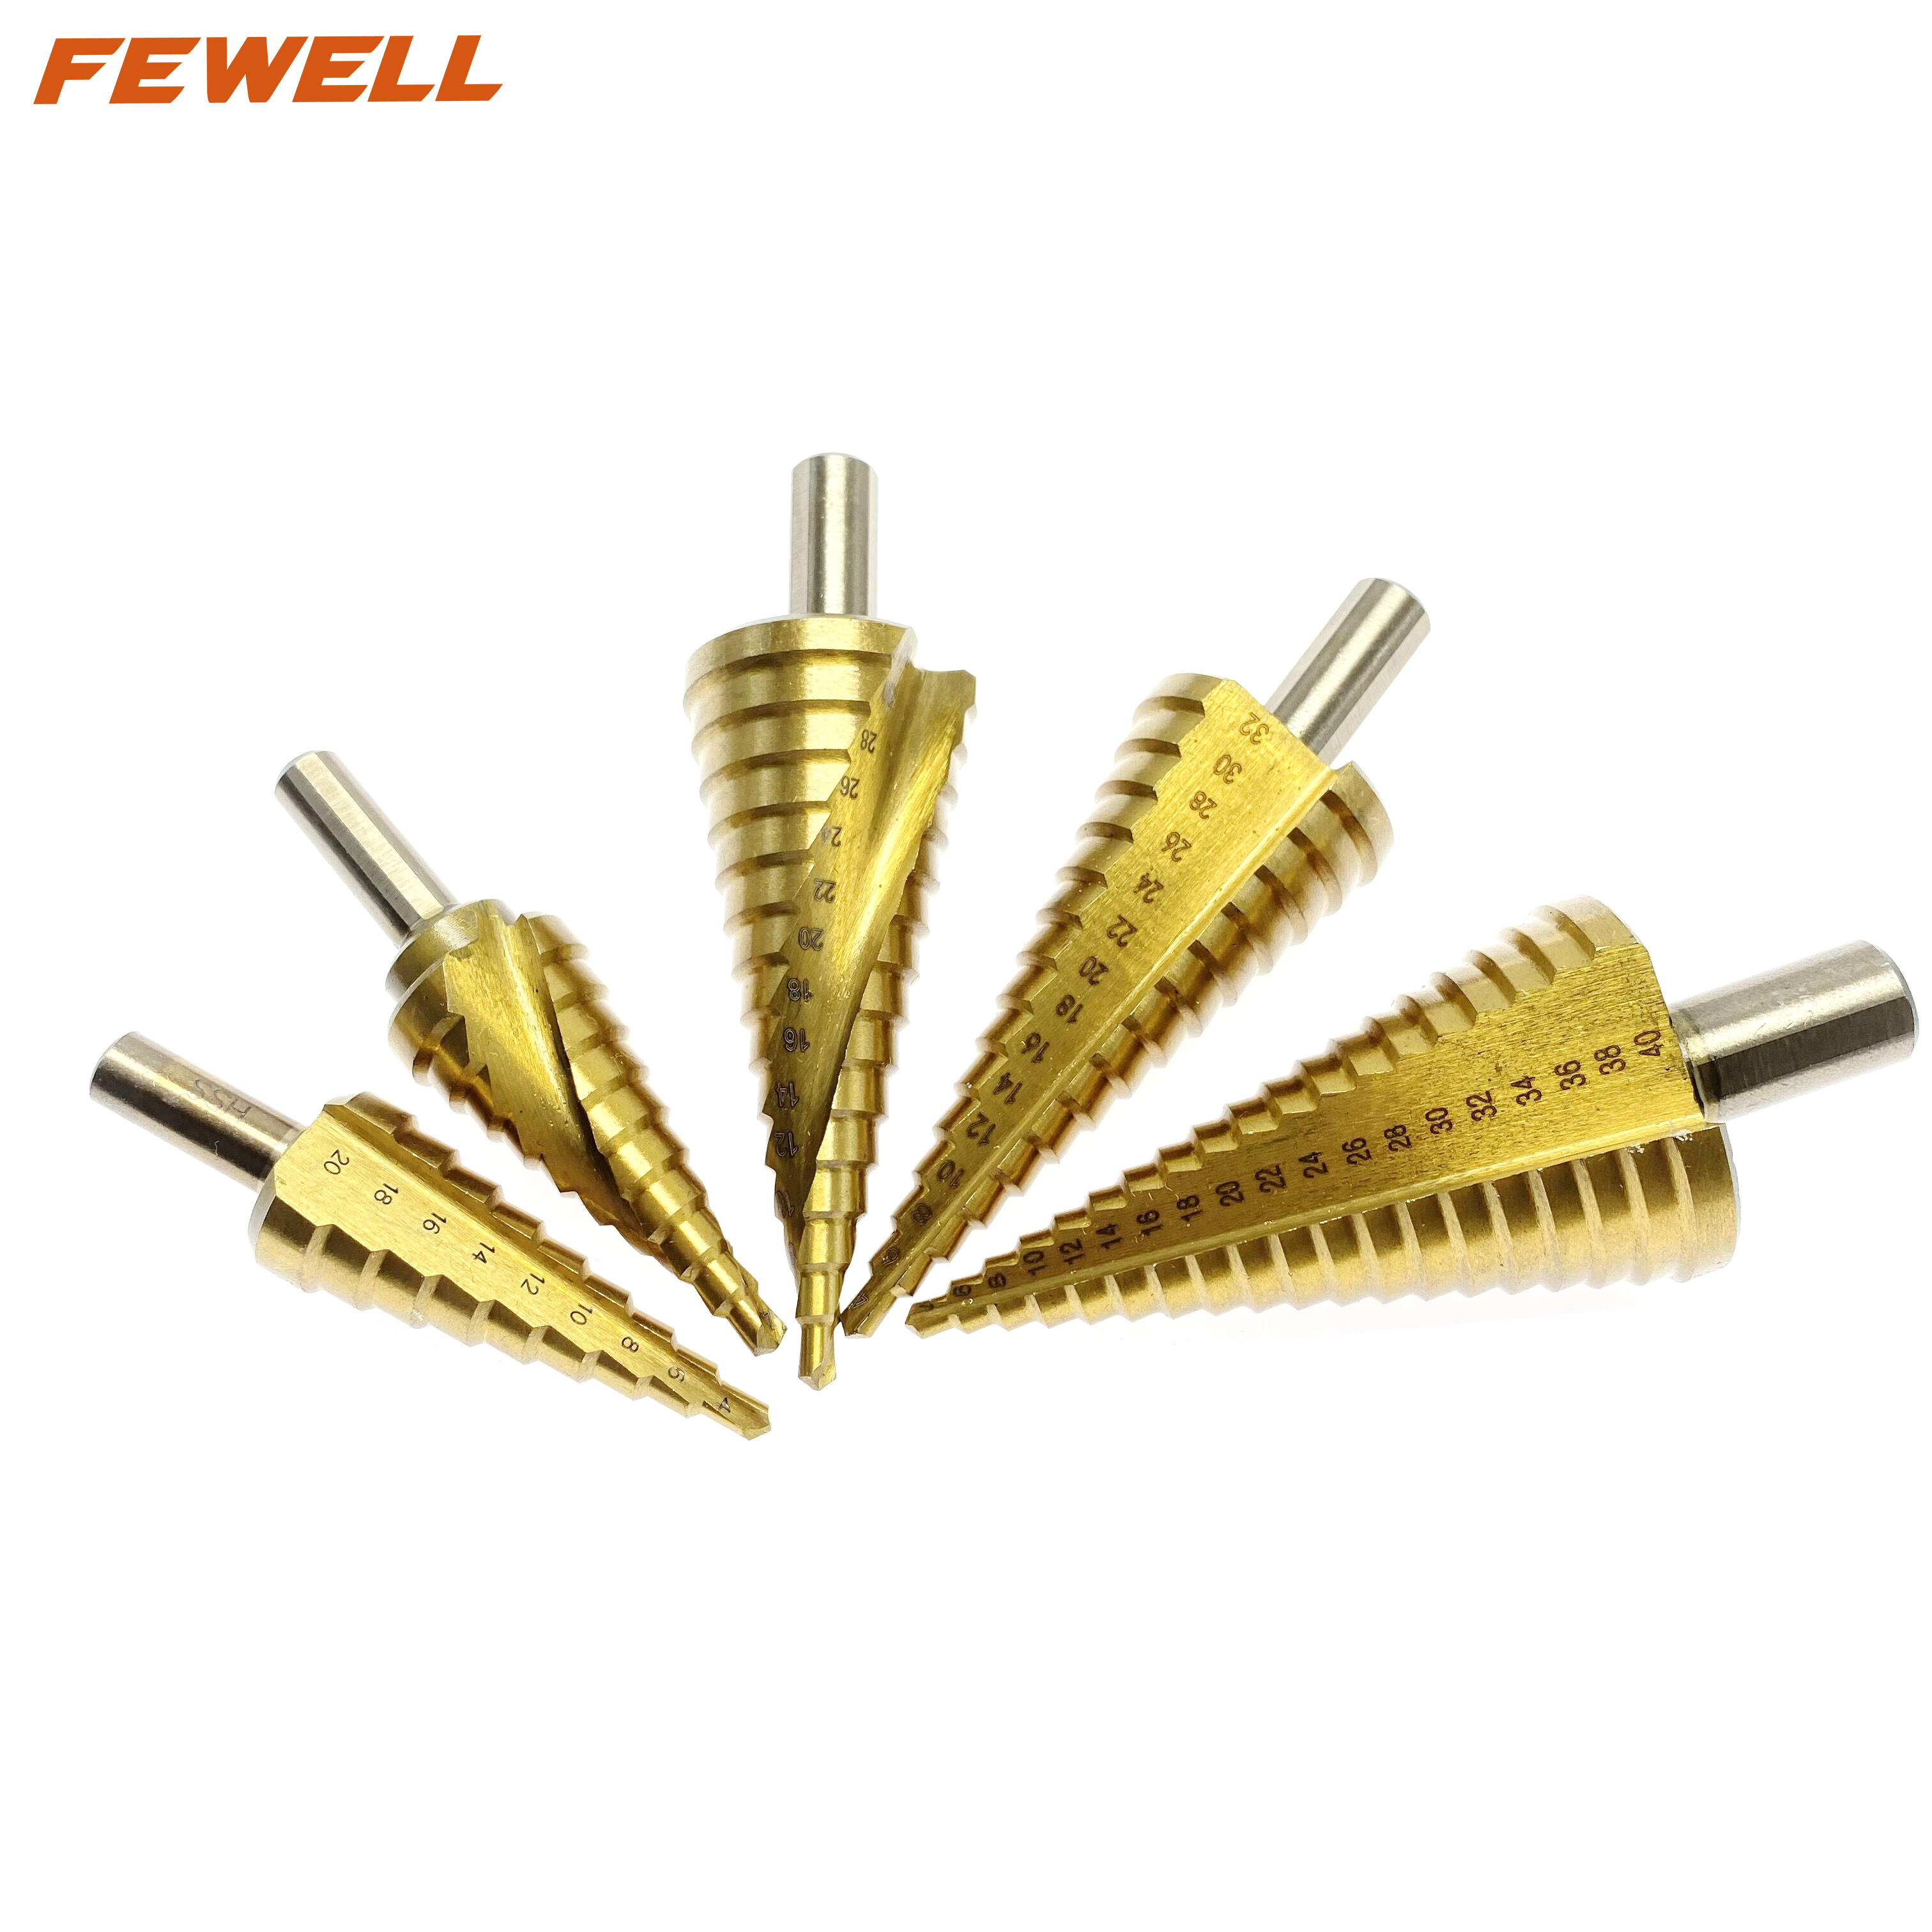 High quality Titanium coated 4241 HSS spiral flute step drill bit 4-22/32 mm for metal drilling